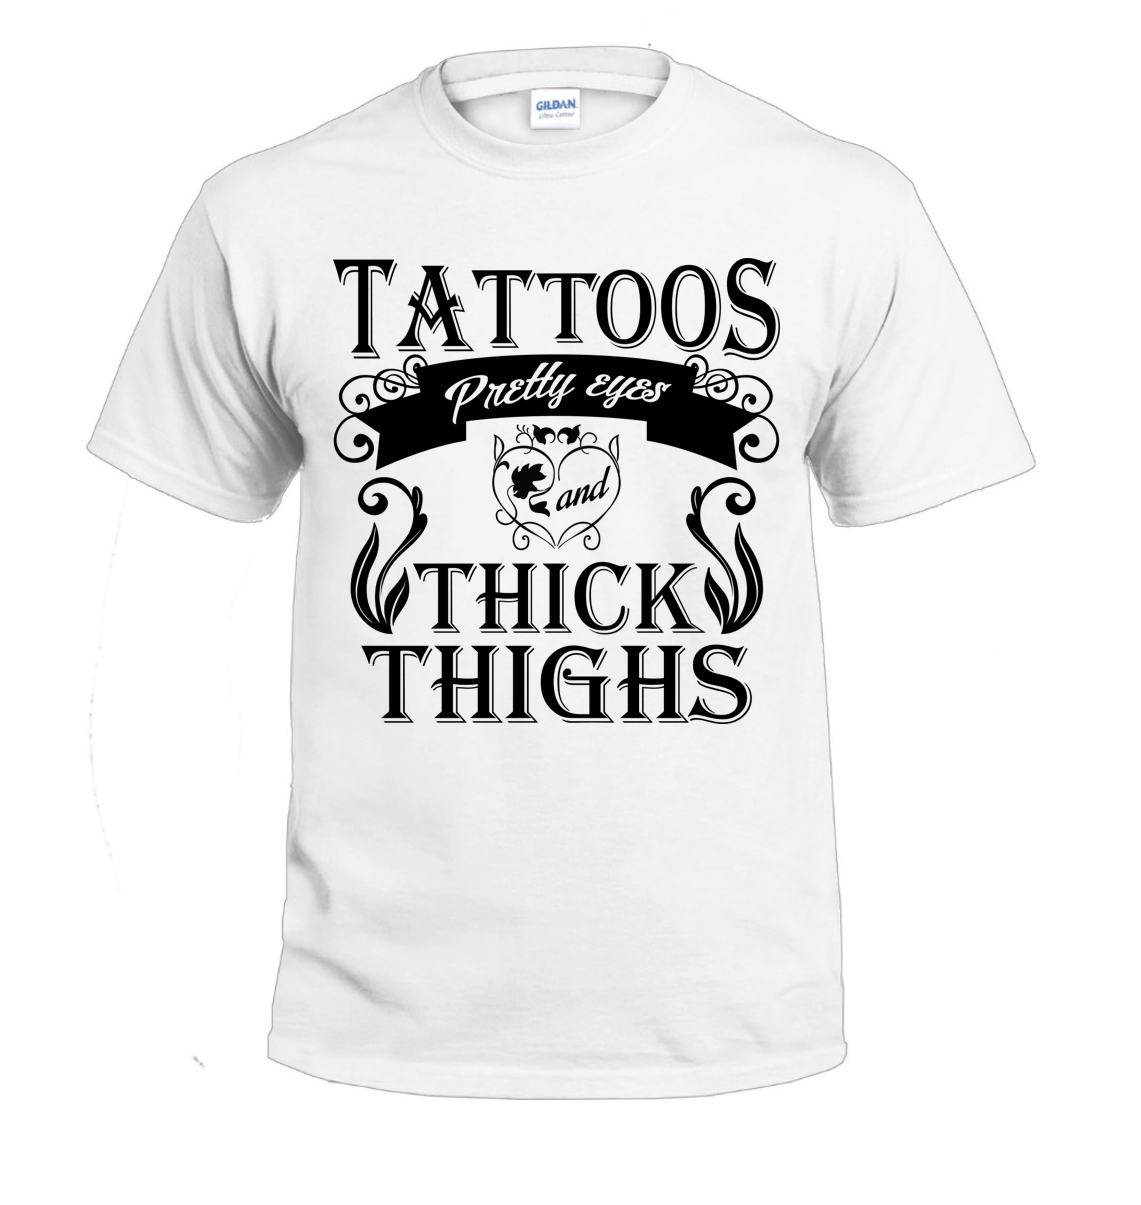 Tattoos Eyes and Thick Thighs t-shirt